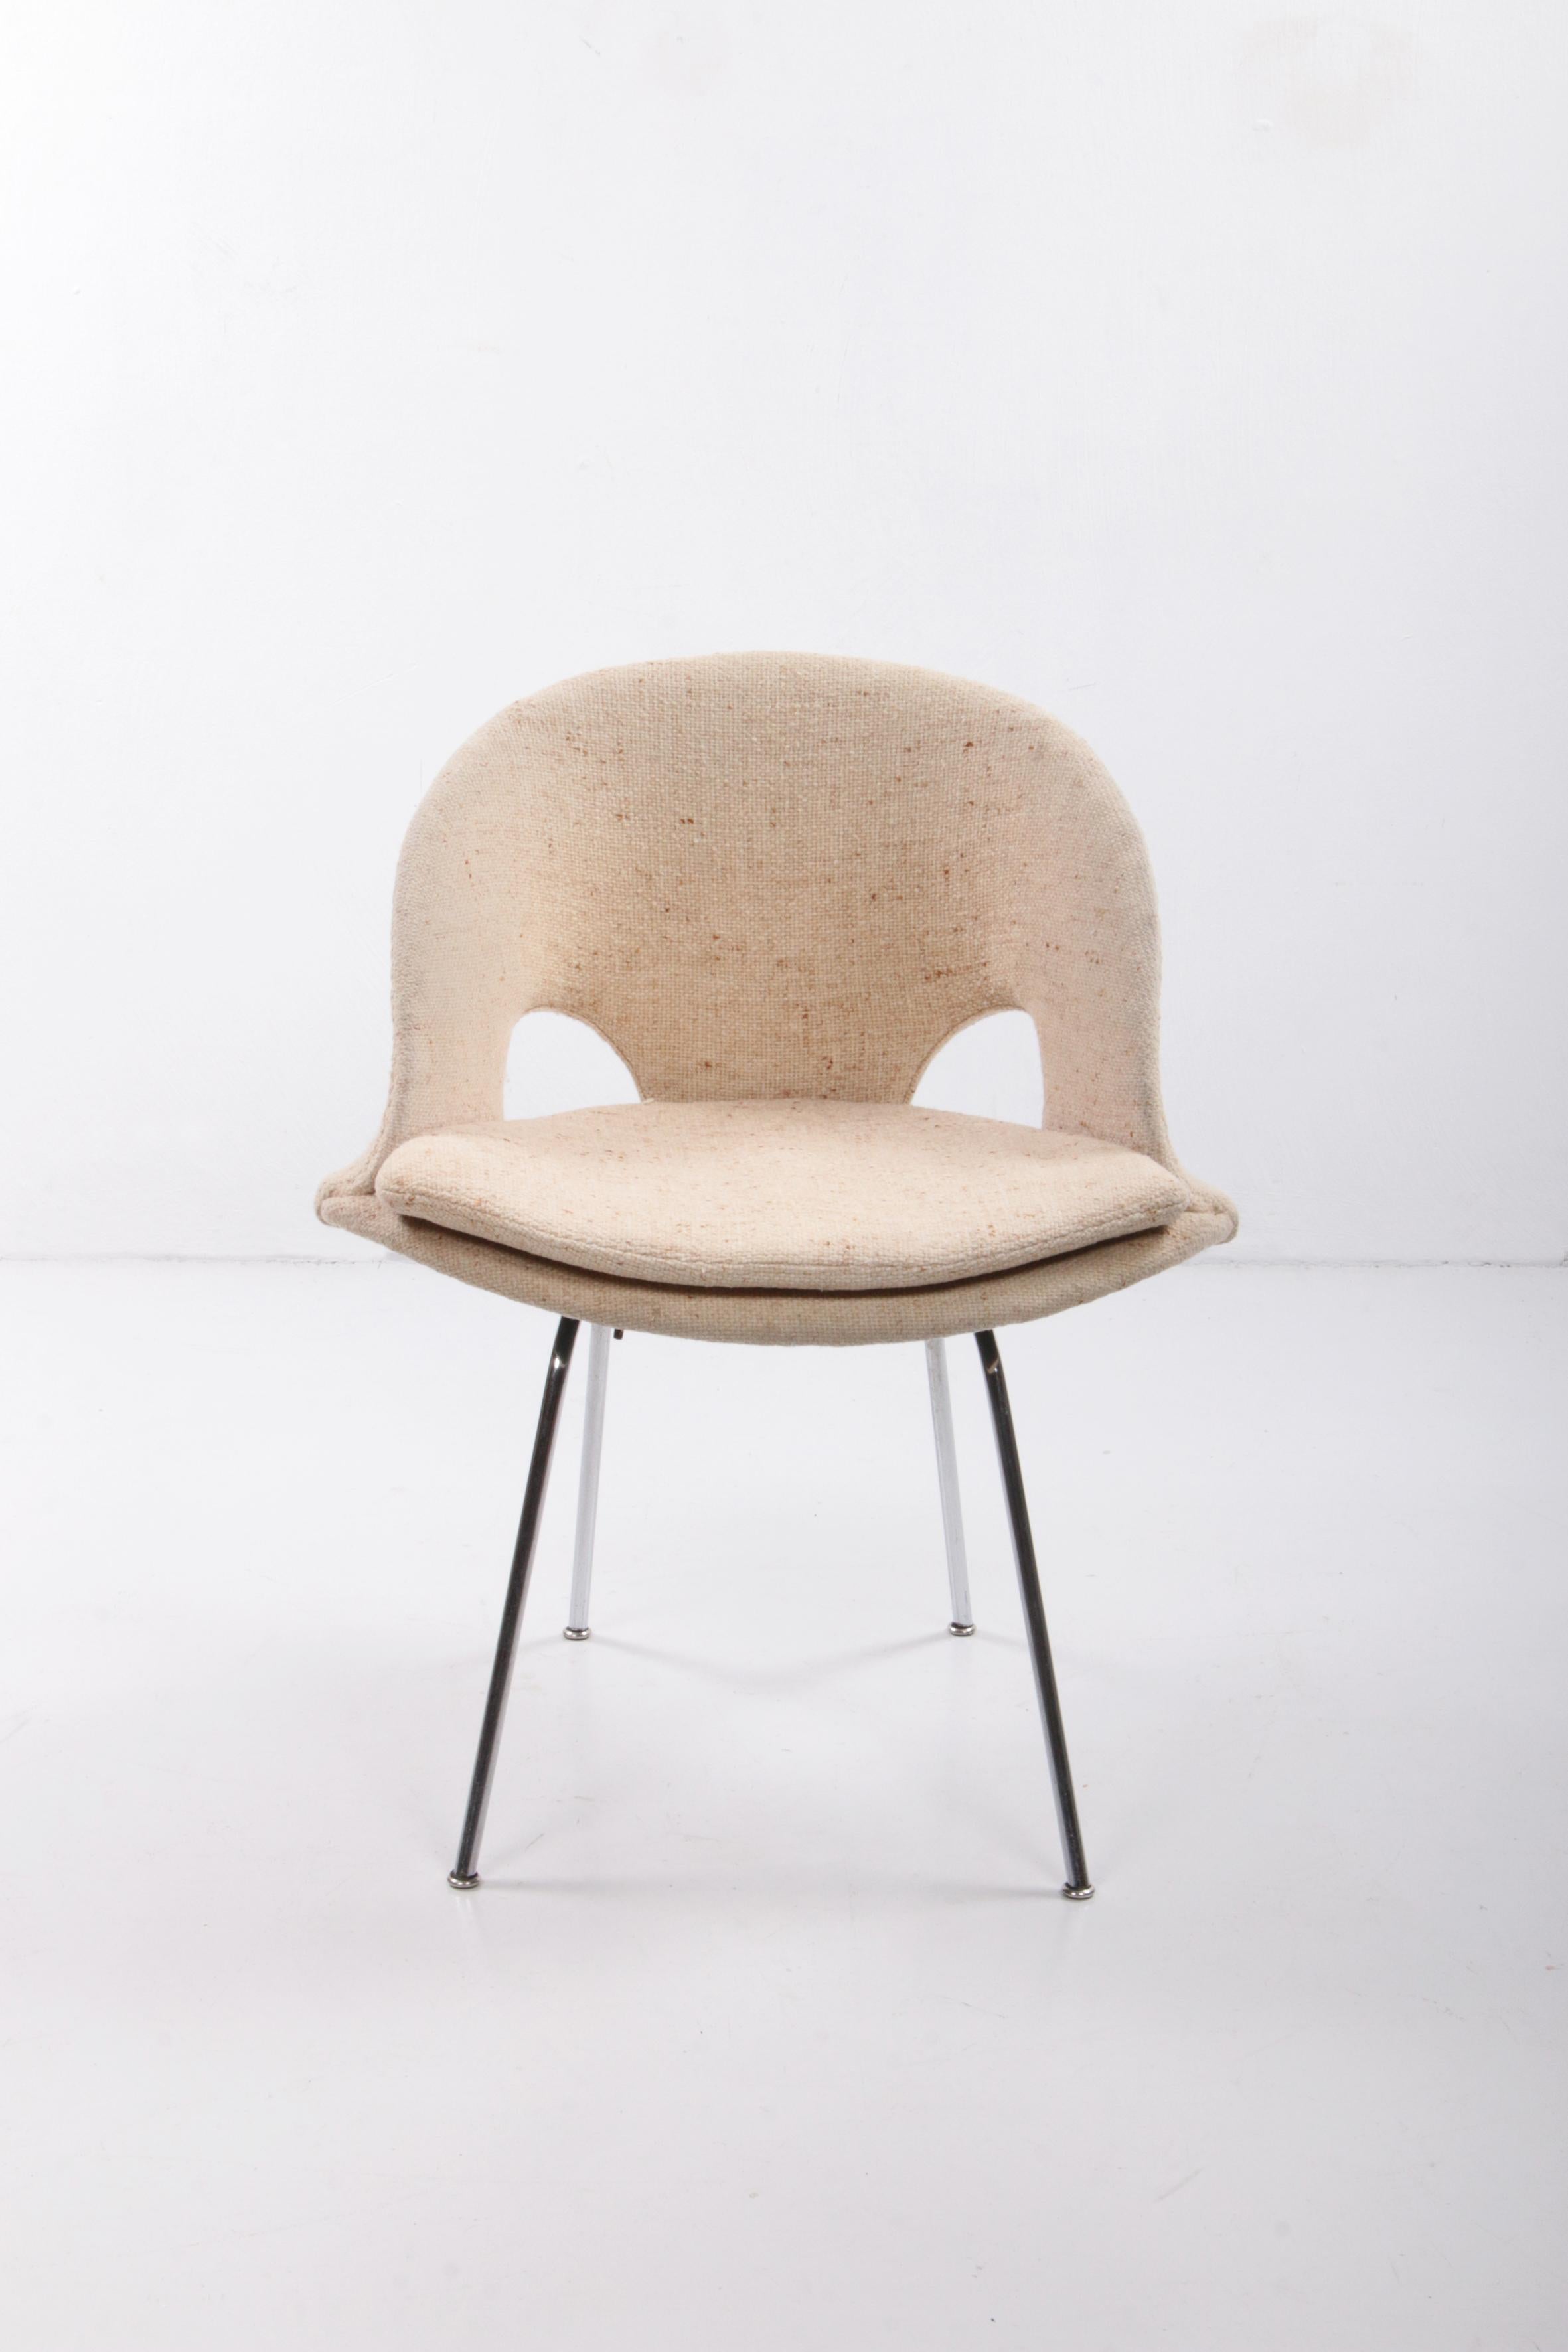 Walter Knoll Lounge Chair by Arno Votteler Model 350, 1950s For Sale 5